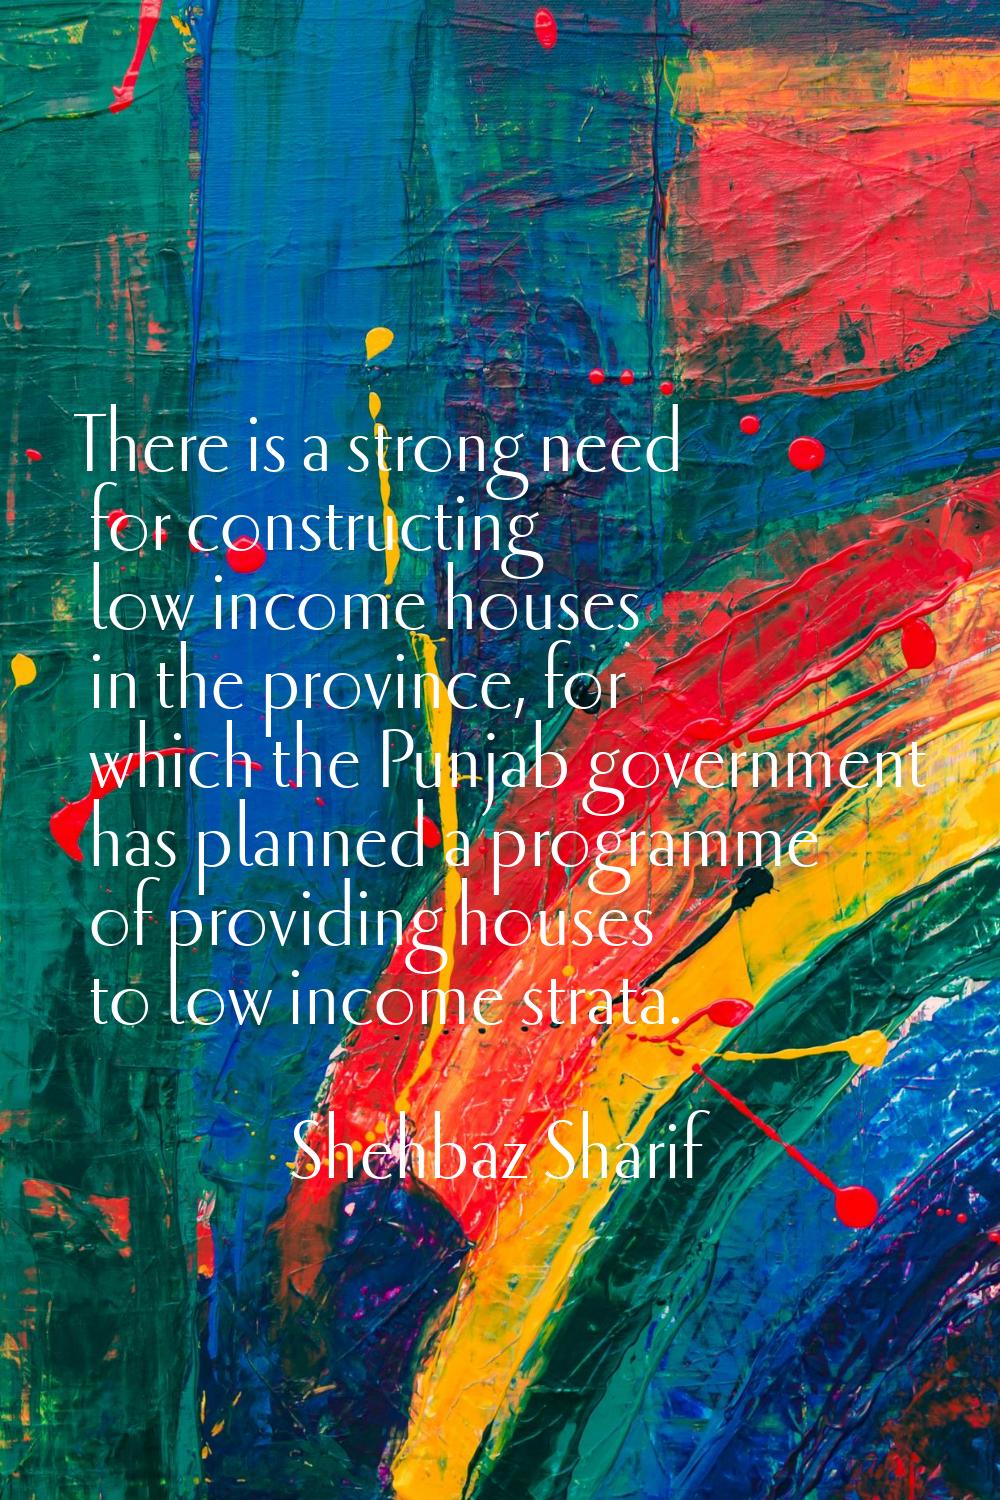 There is a strong need for constructing low income houses in the province, for which the Punjab gov